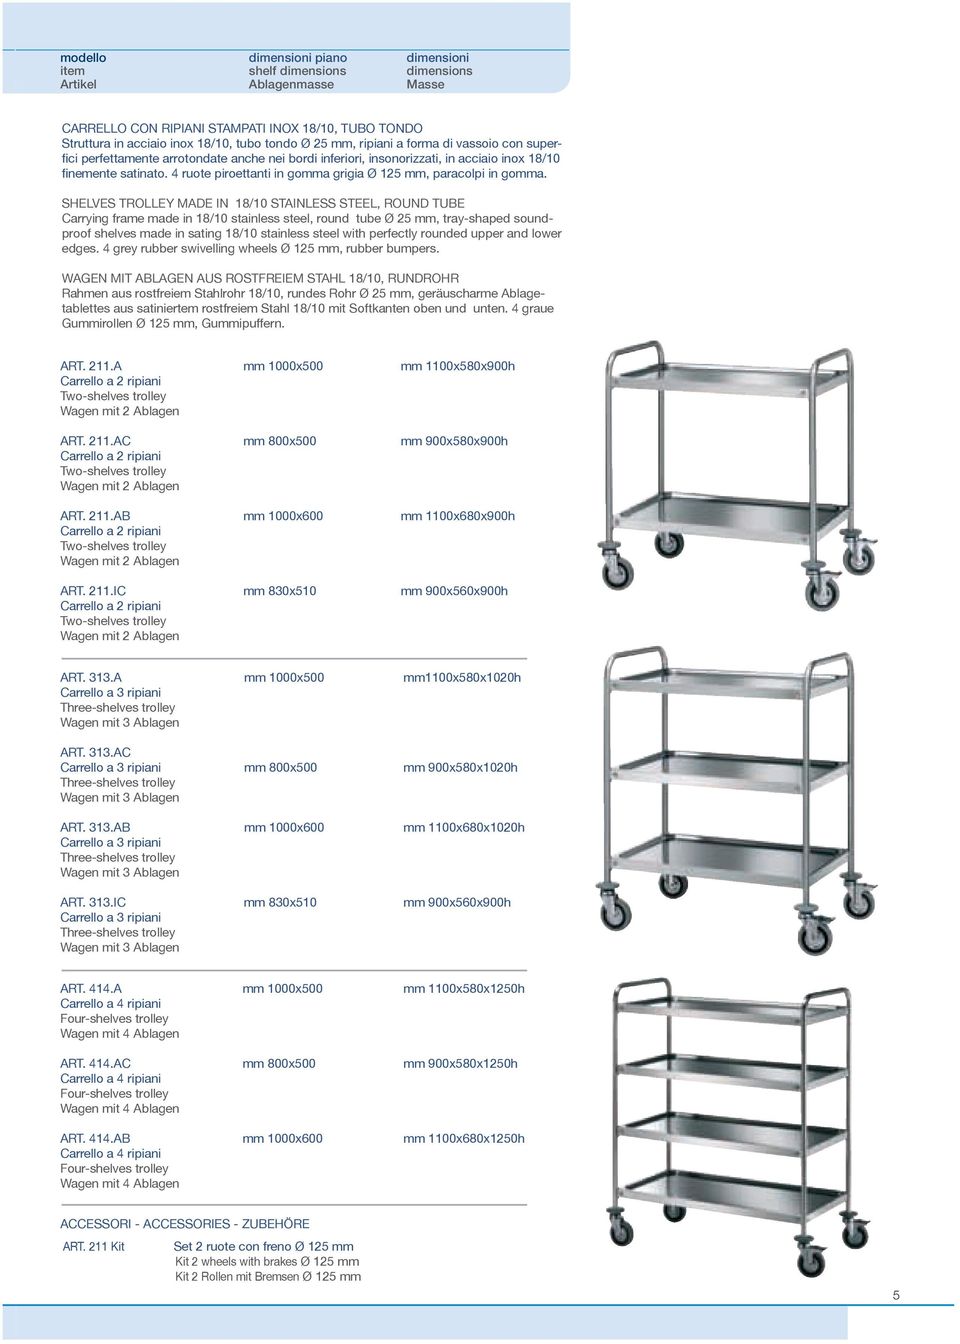 SHELVES TROLLEY MADE IN 18/10 STAINLESS STEEL, ROUND TUBE Carrying frame made in 18/10 stainless steel, round tube Ø 25 mm, tray-shaped soundproof shelves made in sating 18/10 stainless steel with